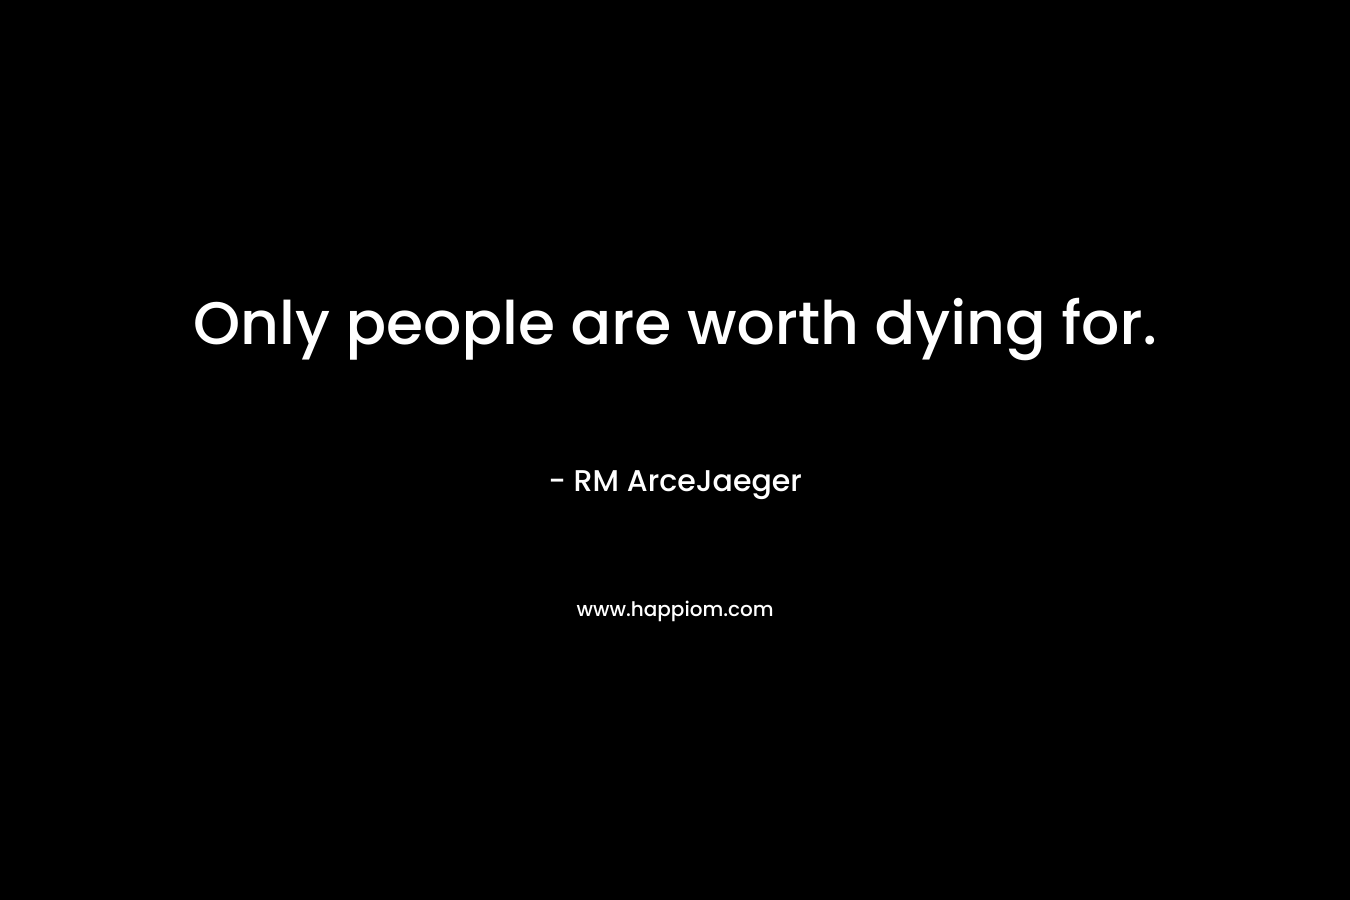 Only people are worth dying for.